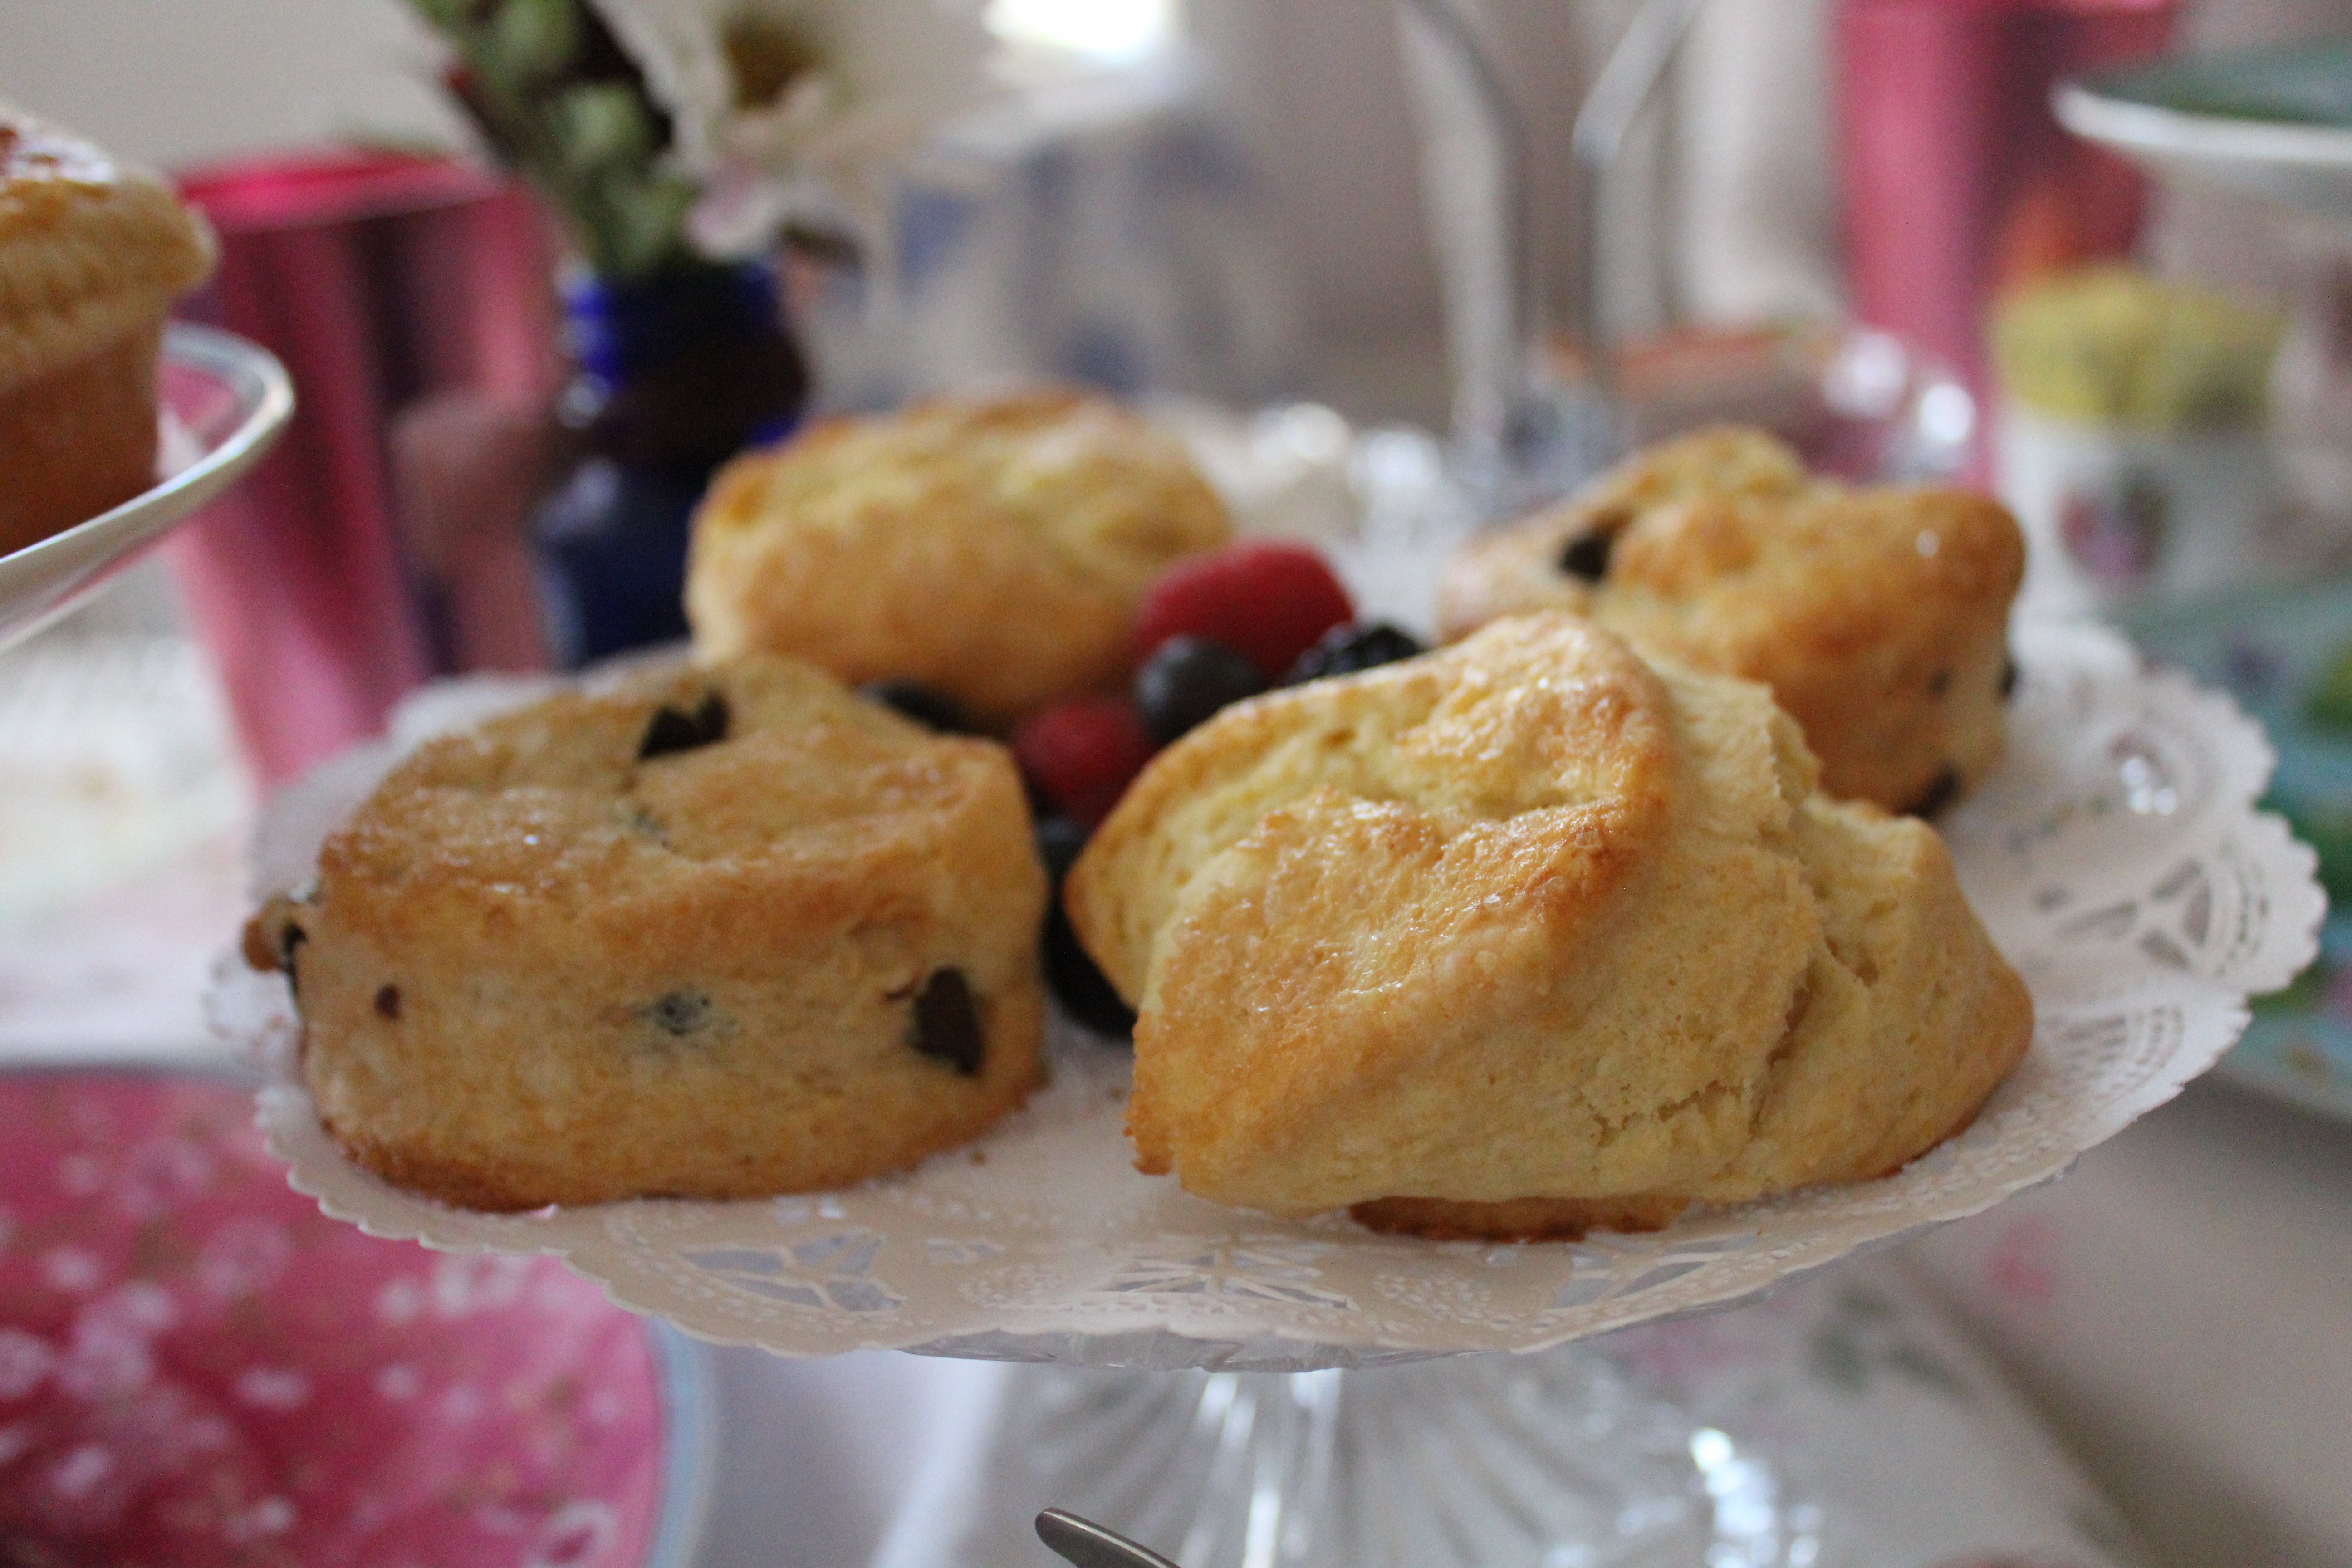 Tray of scones, photo by Carrie Uffindell